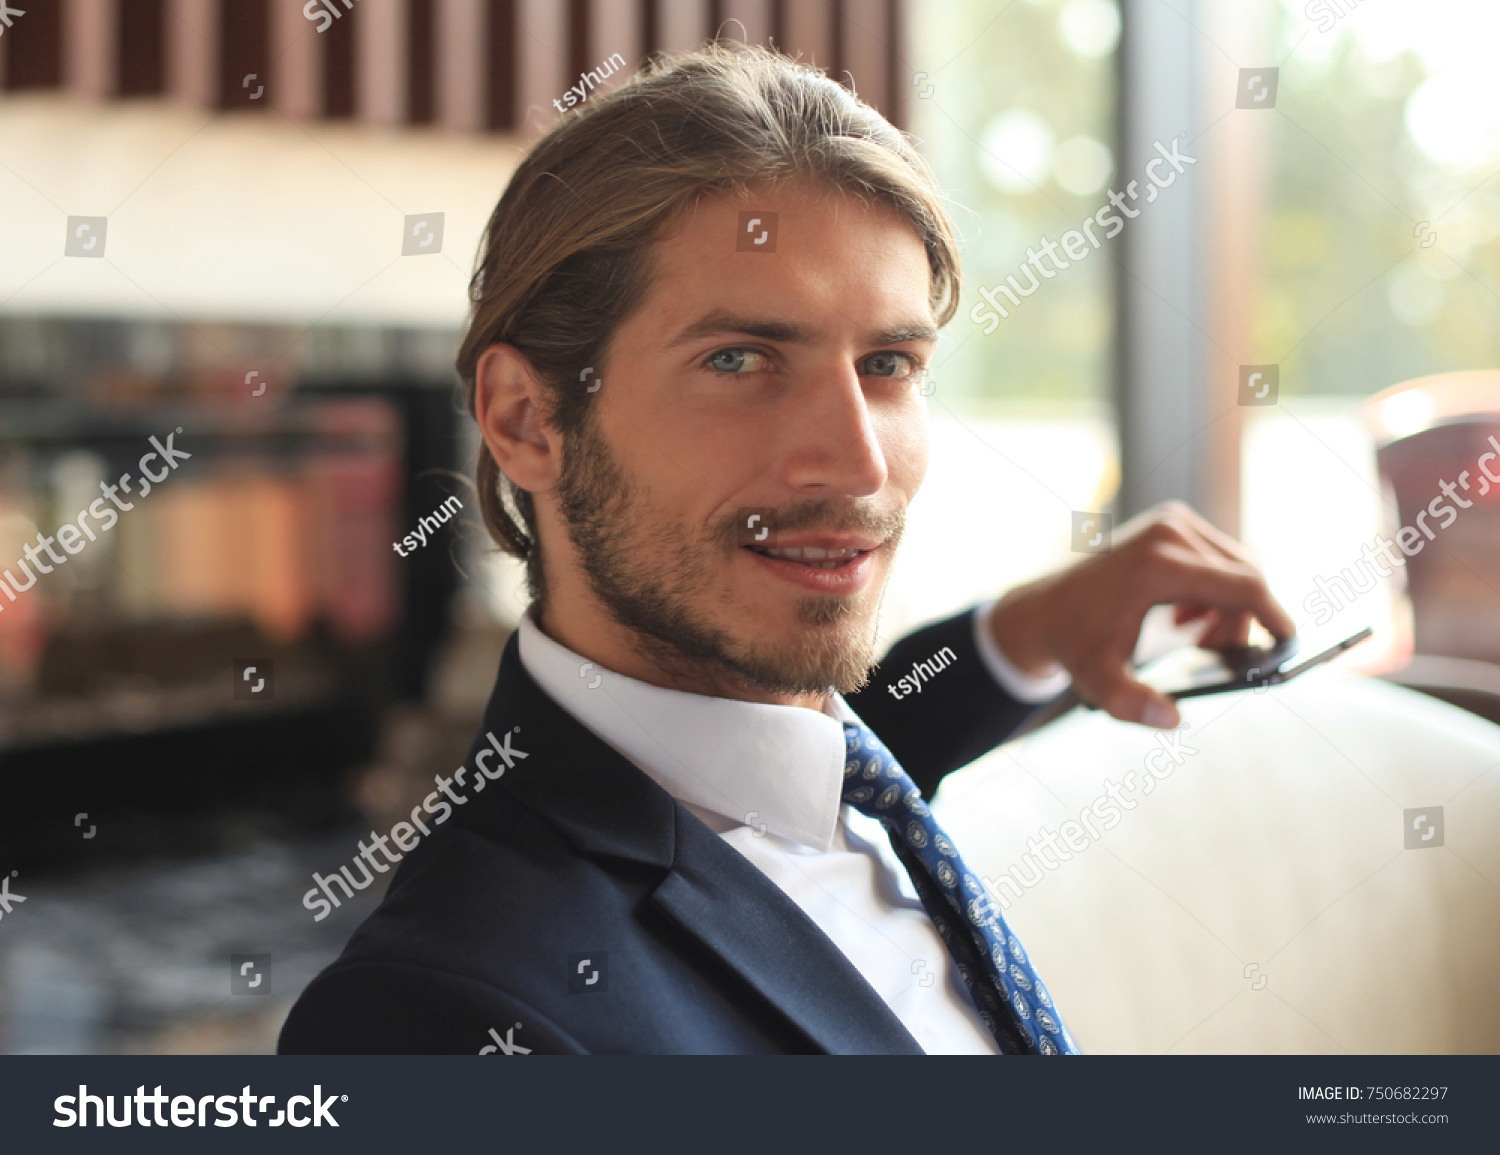 Portrait of happy young businessman sitting on sofa in hotel lobby. #750682297